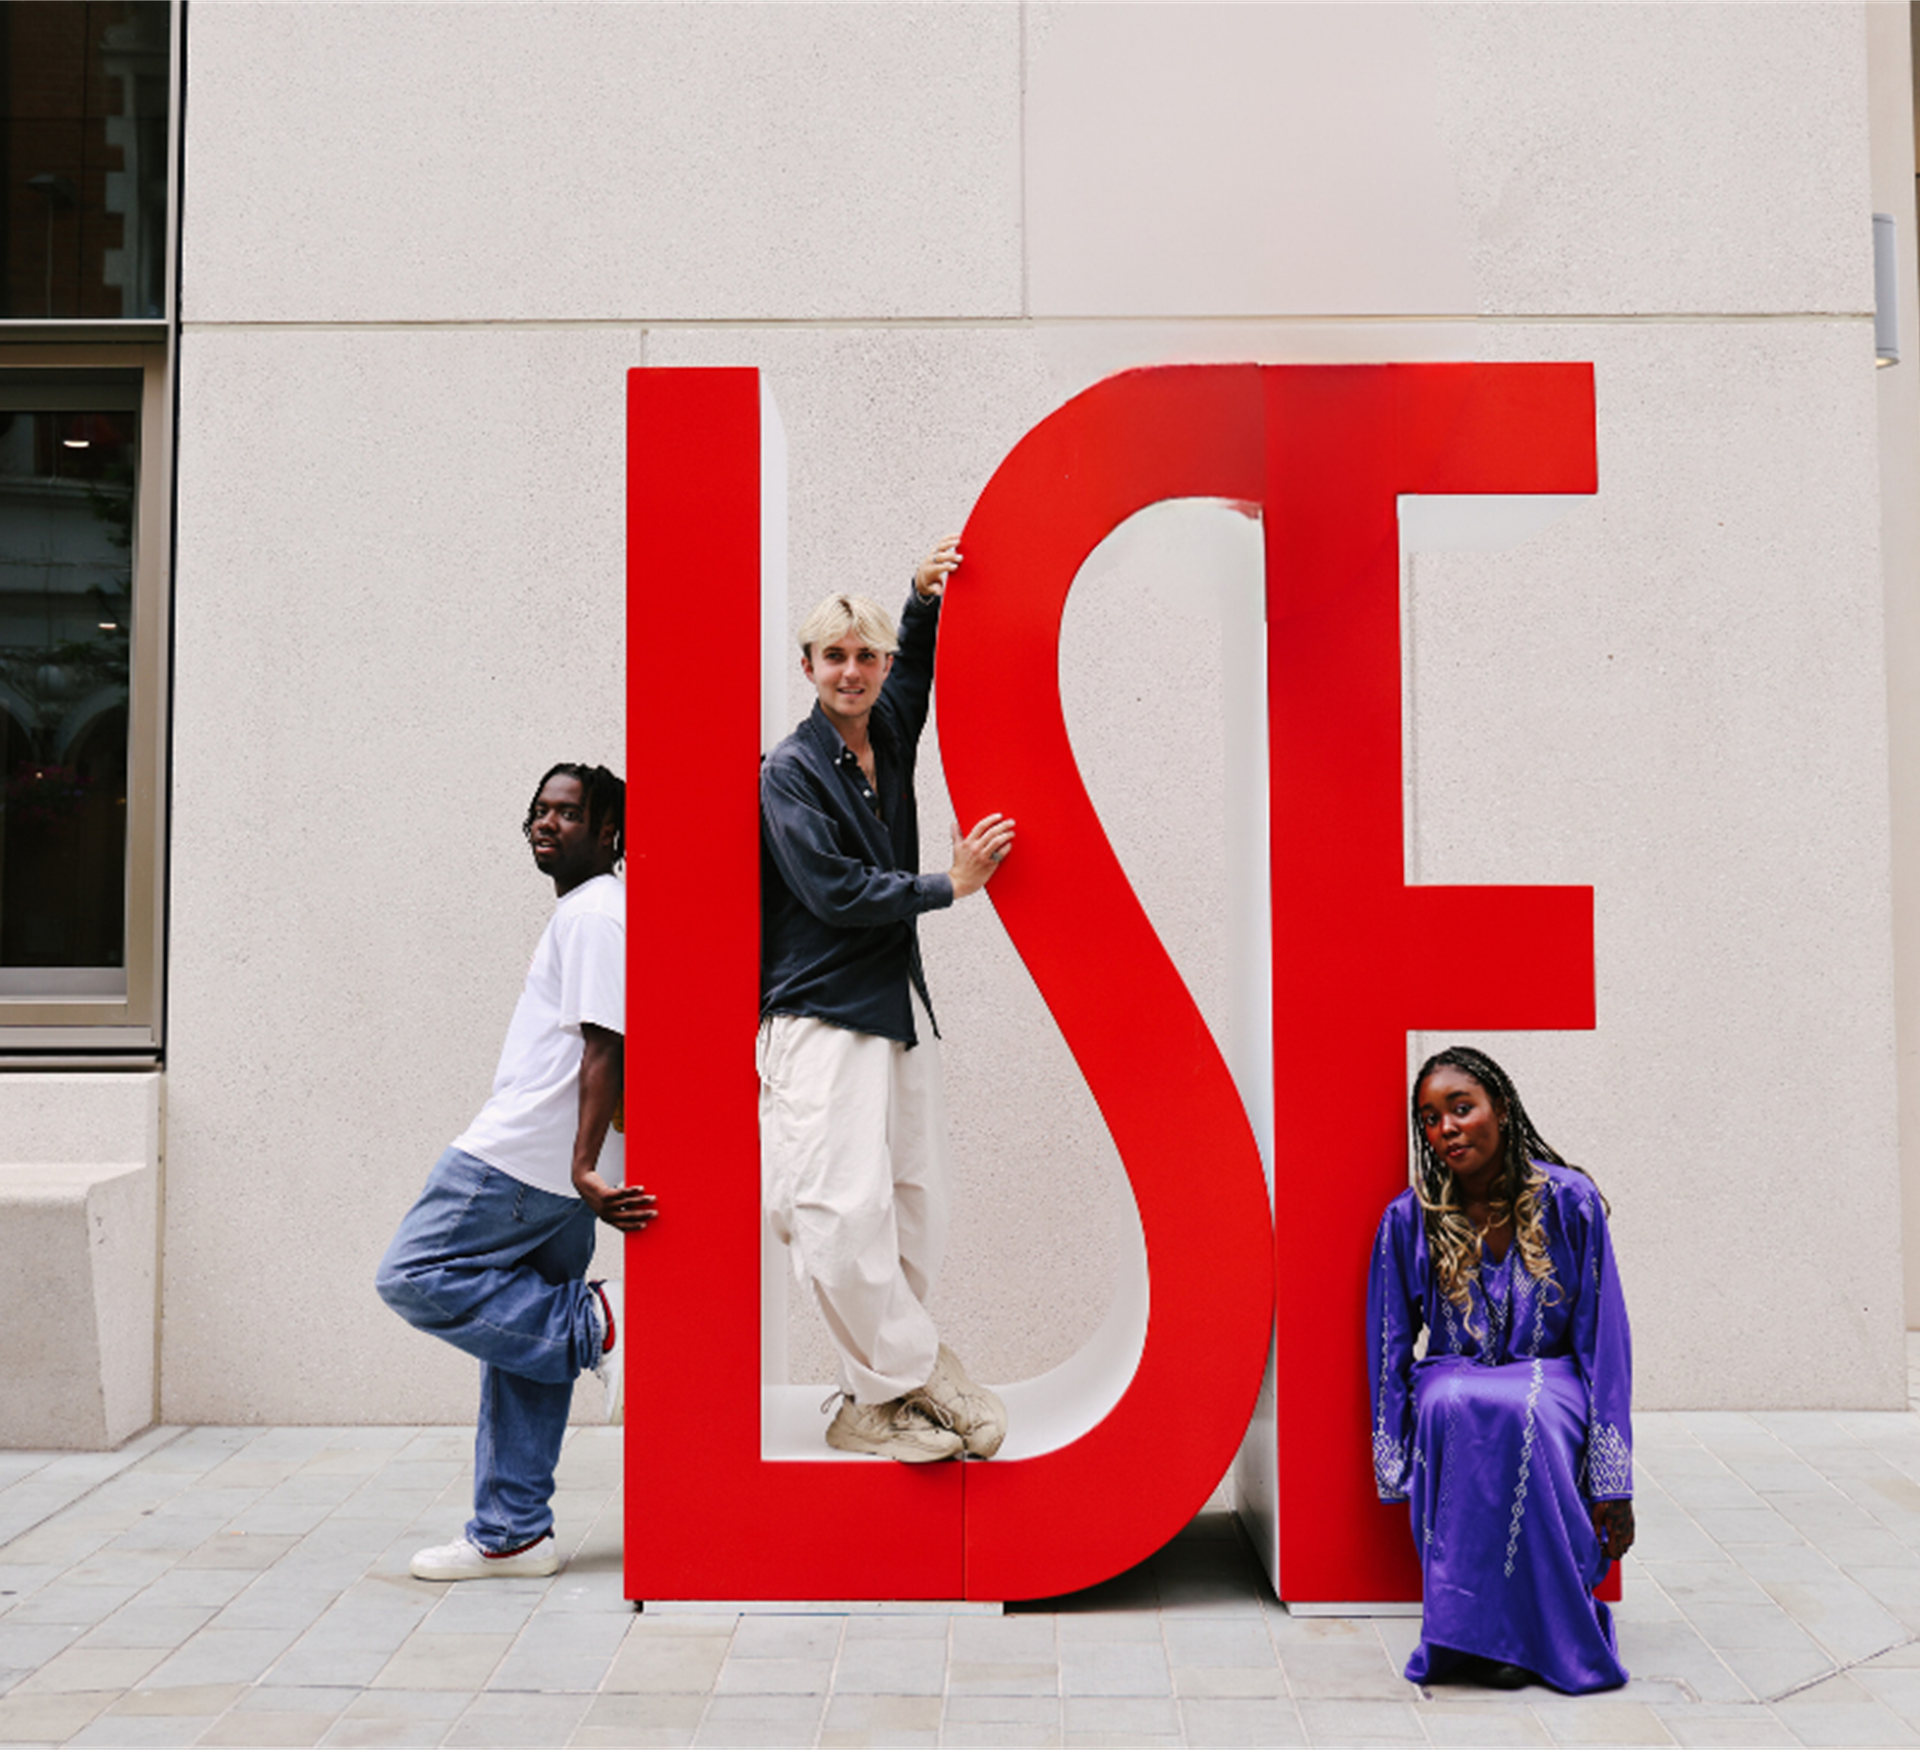 Every year, LSE students elect new leaders to take the London School of Economics Students’ Union to new heights.  They represent the interests of students at national and local level and work to make things better for LSE Students.